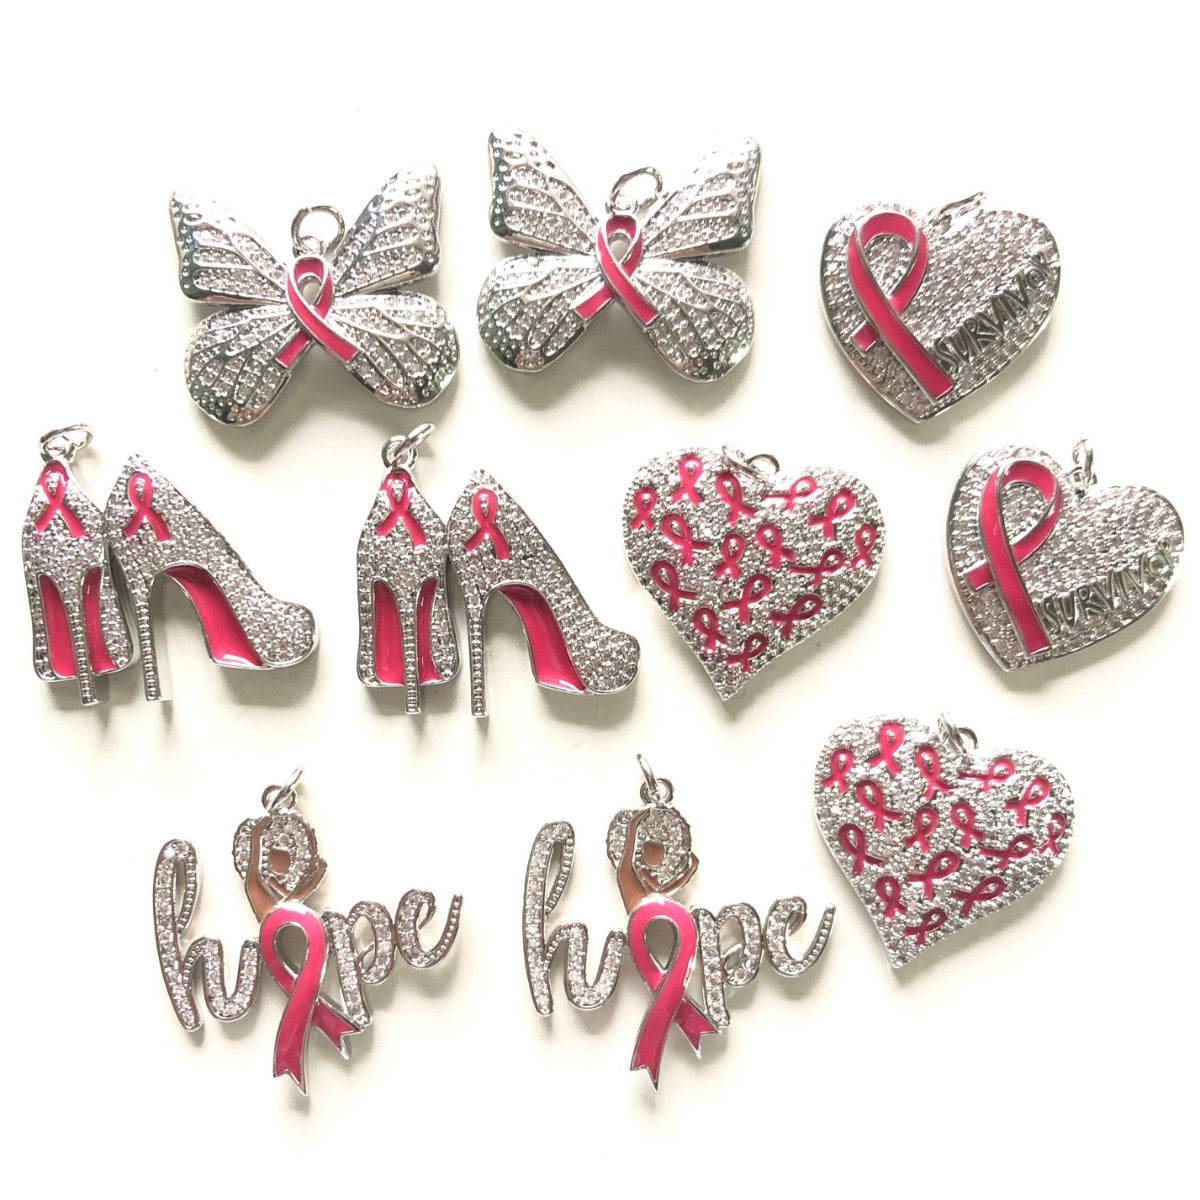 10pcs/lot CZ Pave Pink Ribbon Heart High Heel Butterfly Hope Word Breast Cancer Awareness Charms Bundle Silver Set CZ Paved Charms Breast Cancer Awareness Mix Charms New Charms Arrivals Charms Beads Beyond